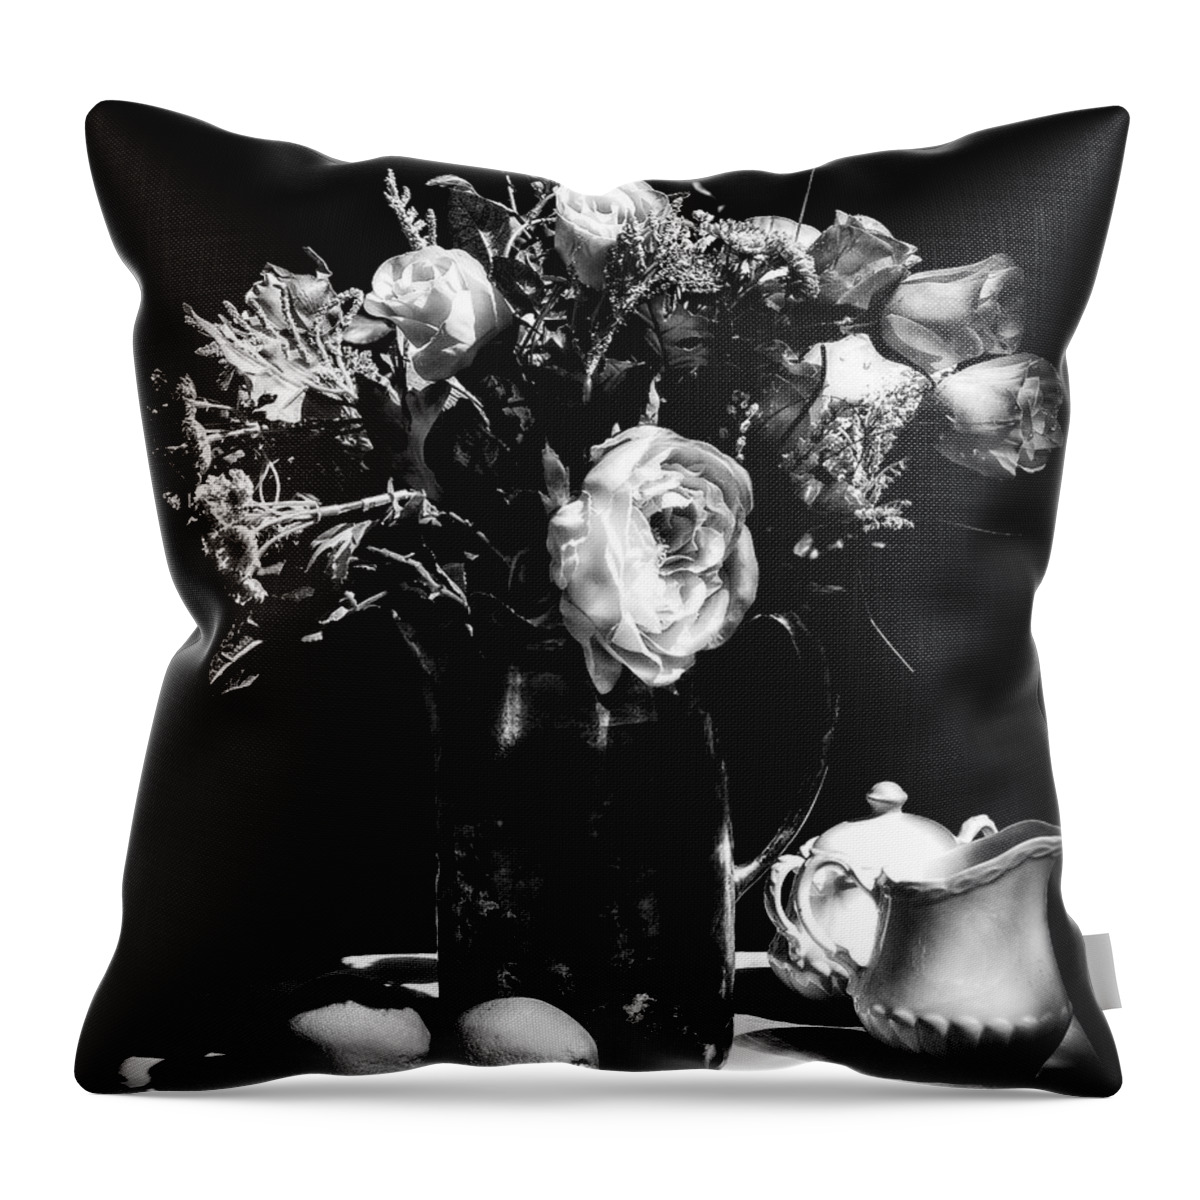 Still Life Throw Pillow featuring the photograph Roses and Oranges by Sandra Selle Rodriguez